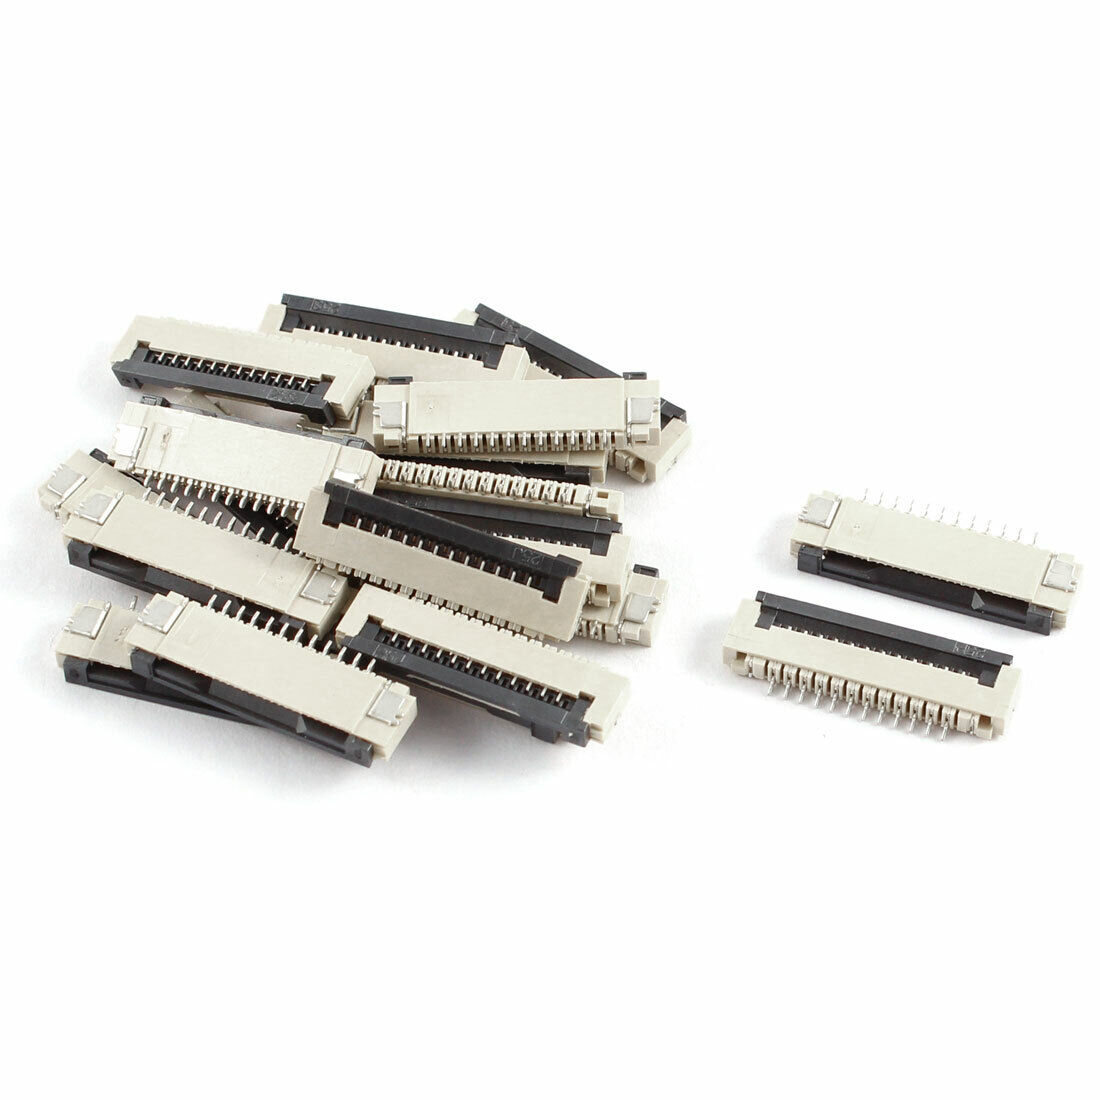 20Pcs Clamshell Type Bottom Port 12Pin 1.0mm Pitch FFC FPC Sockets Connector